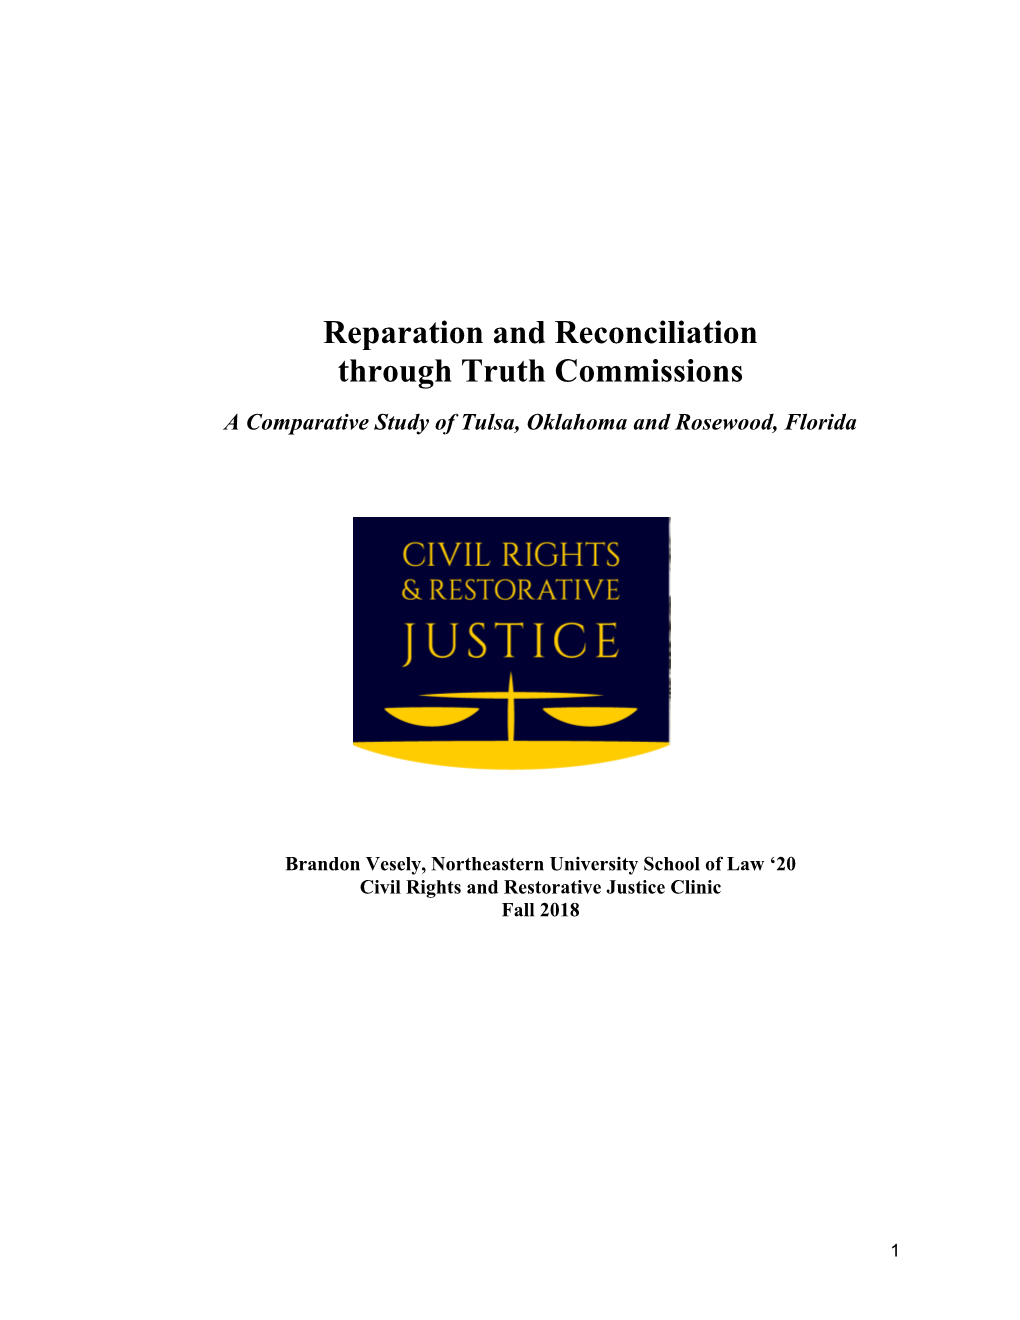 Reparation and Reconciliation Through Truth Commissions a Comparative Study of Tulsa, Oklahoma and Rosewood, Florida